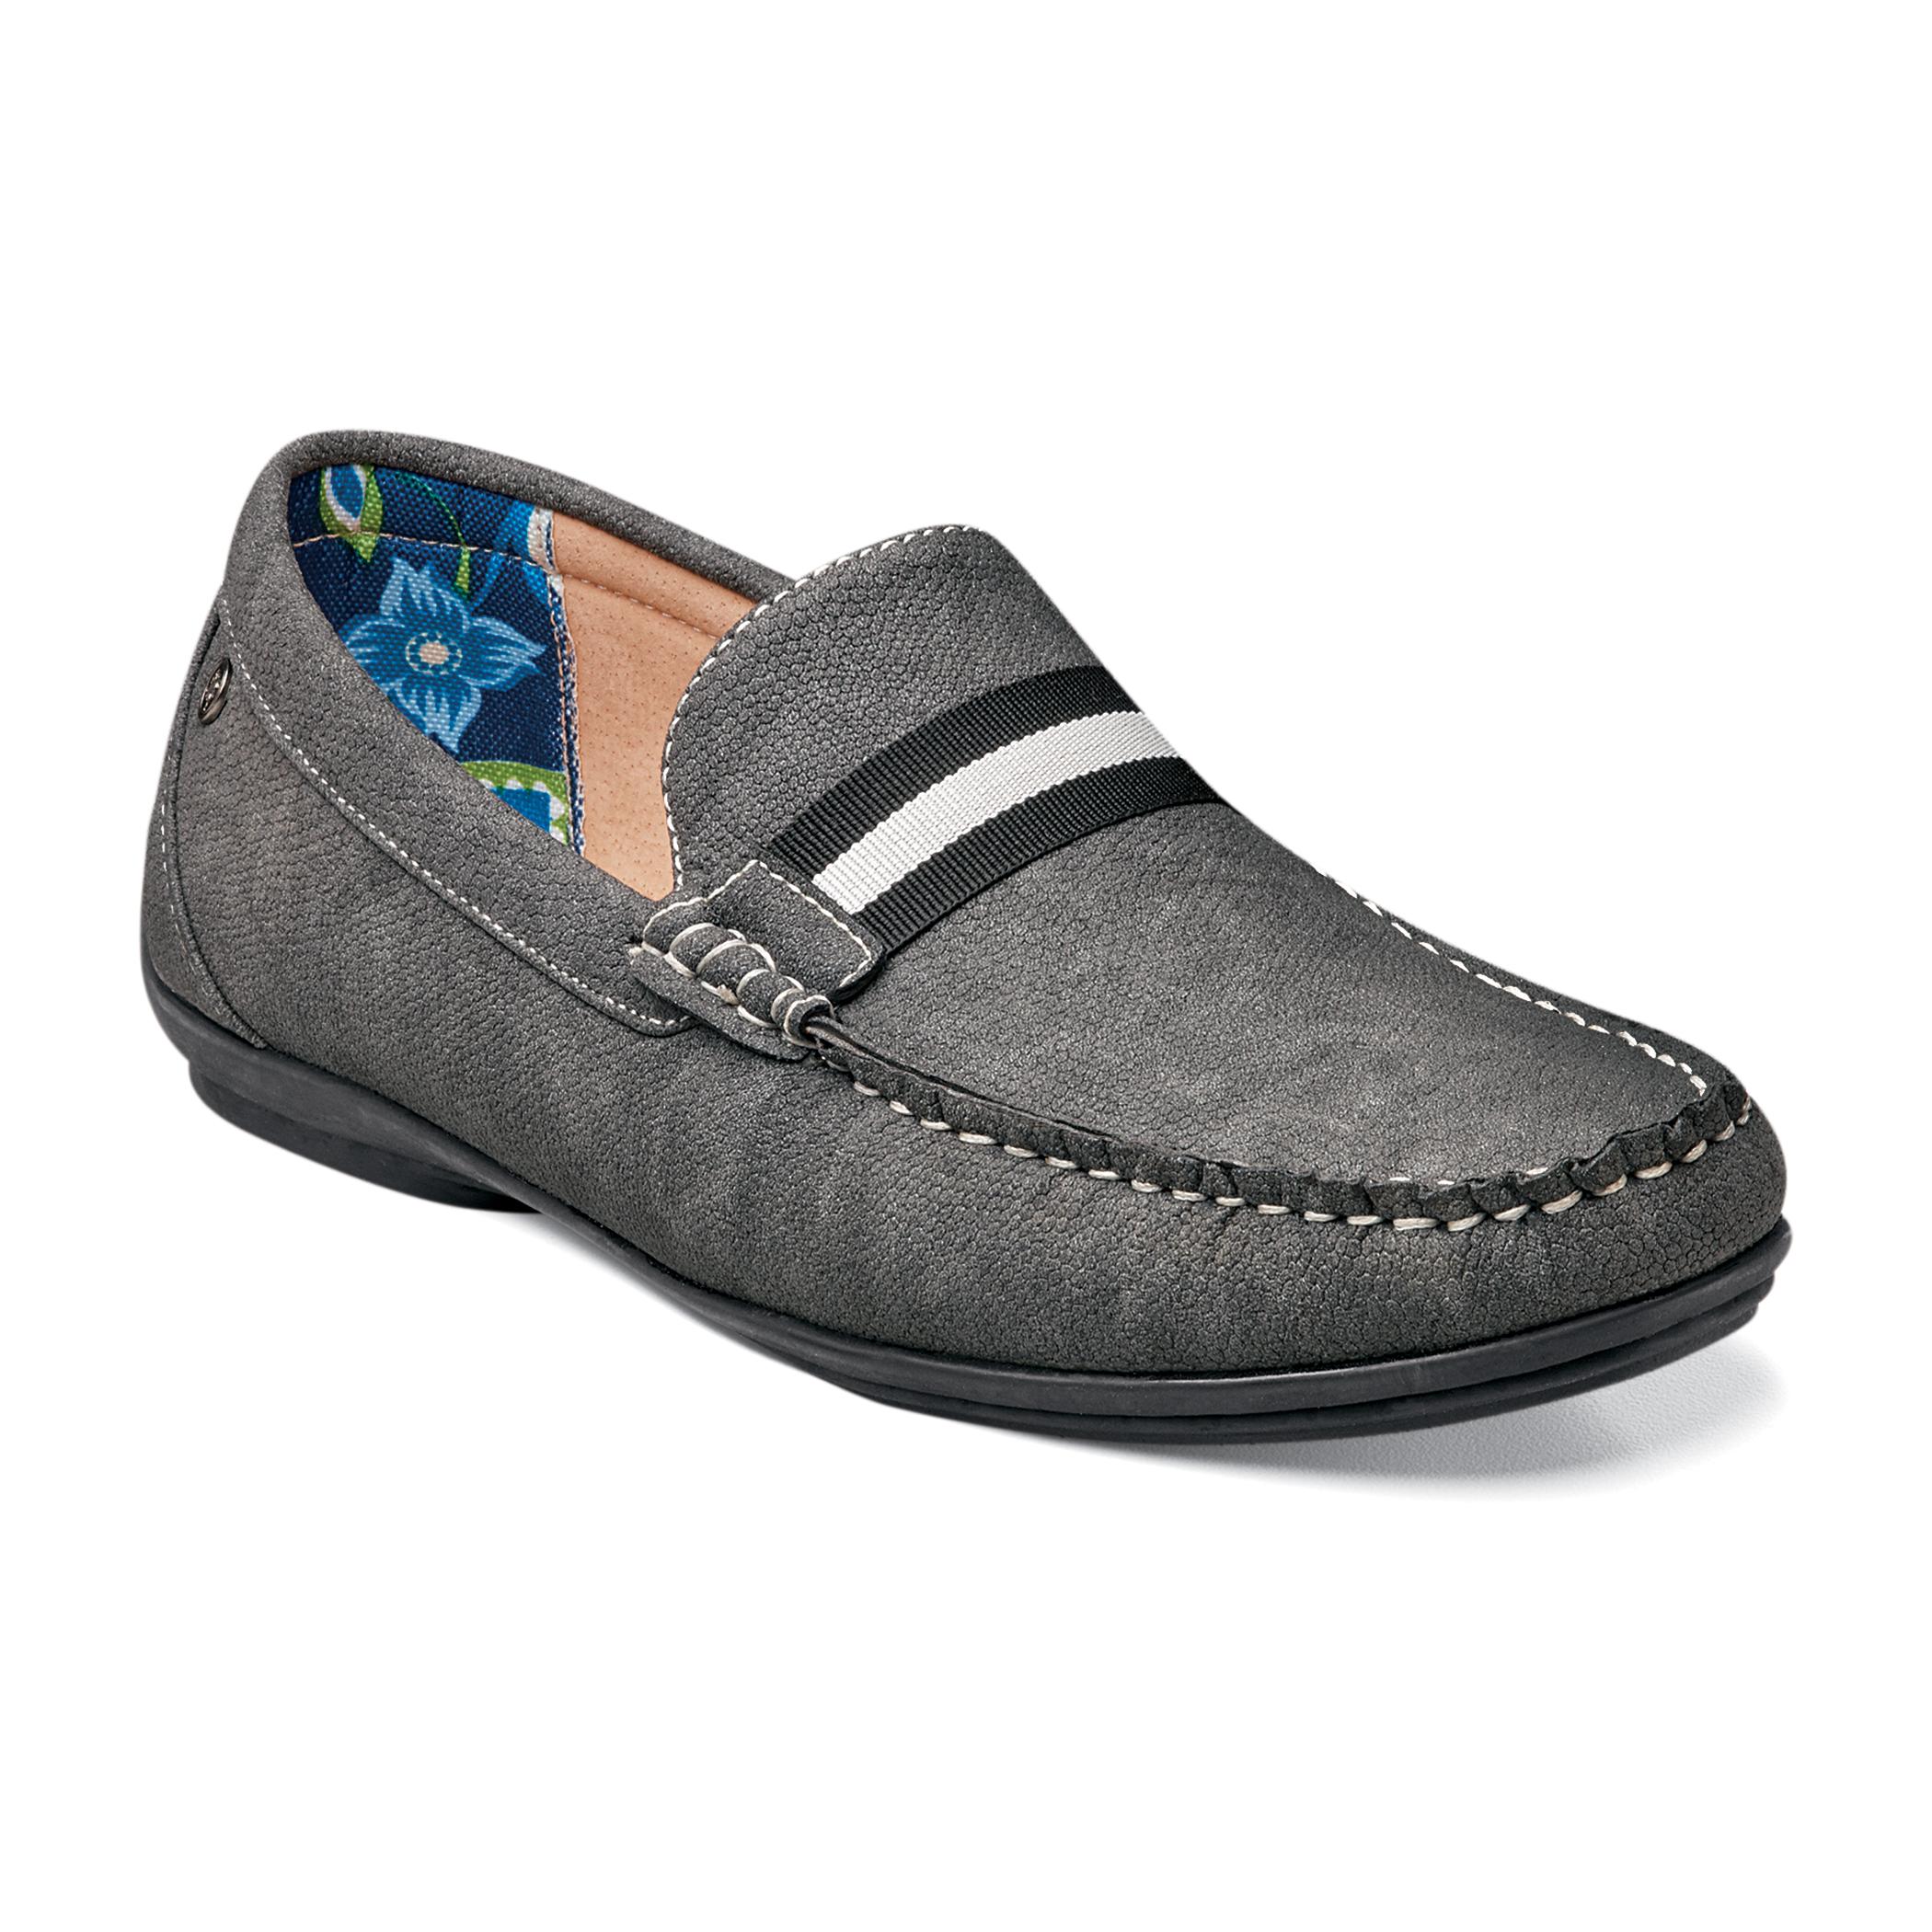 Stacy Adams Pepi Gray Suede Moc Toe Loafer Shoes 24942 - $59.90 ...